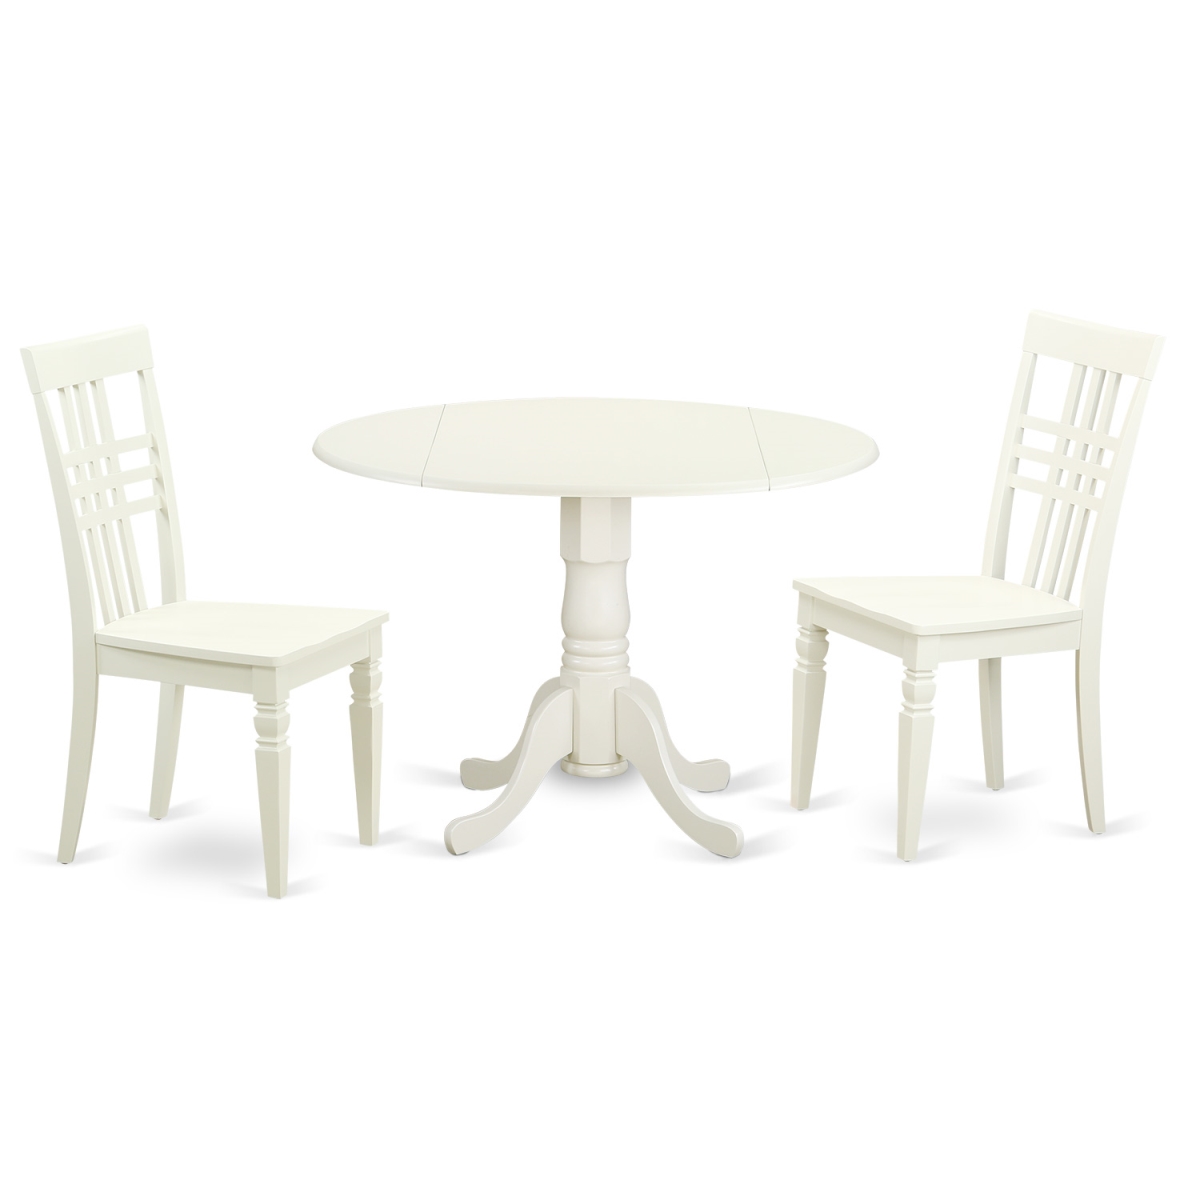 Picture of East West Furniture DLLG3-LWH-W Dining Room Table Set with One Dublin Dining Table & 2 Chairs, Linen White - 3 Piece